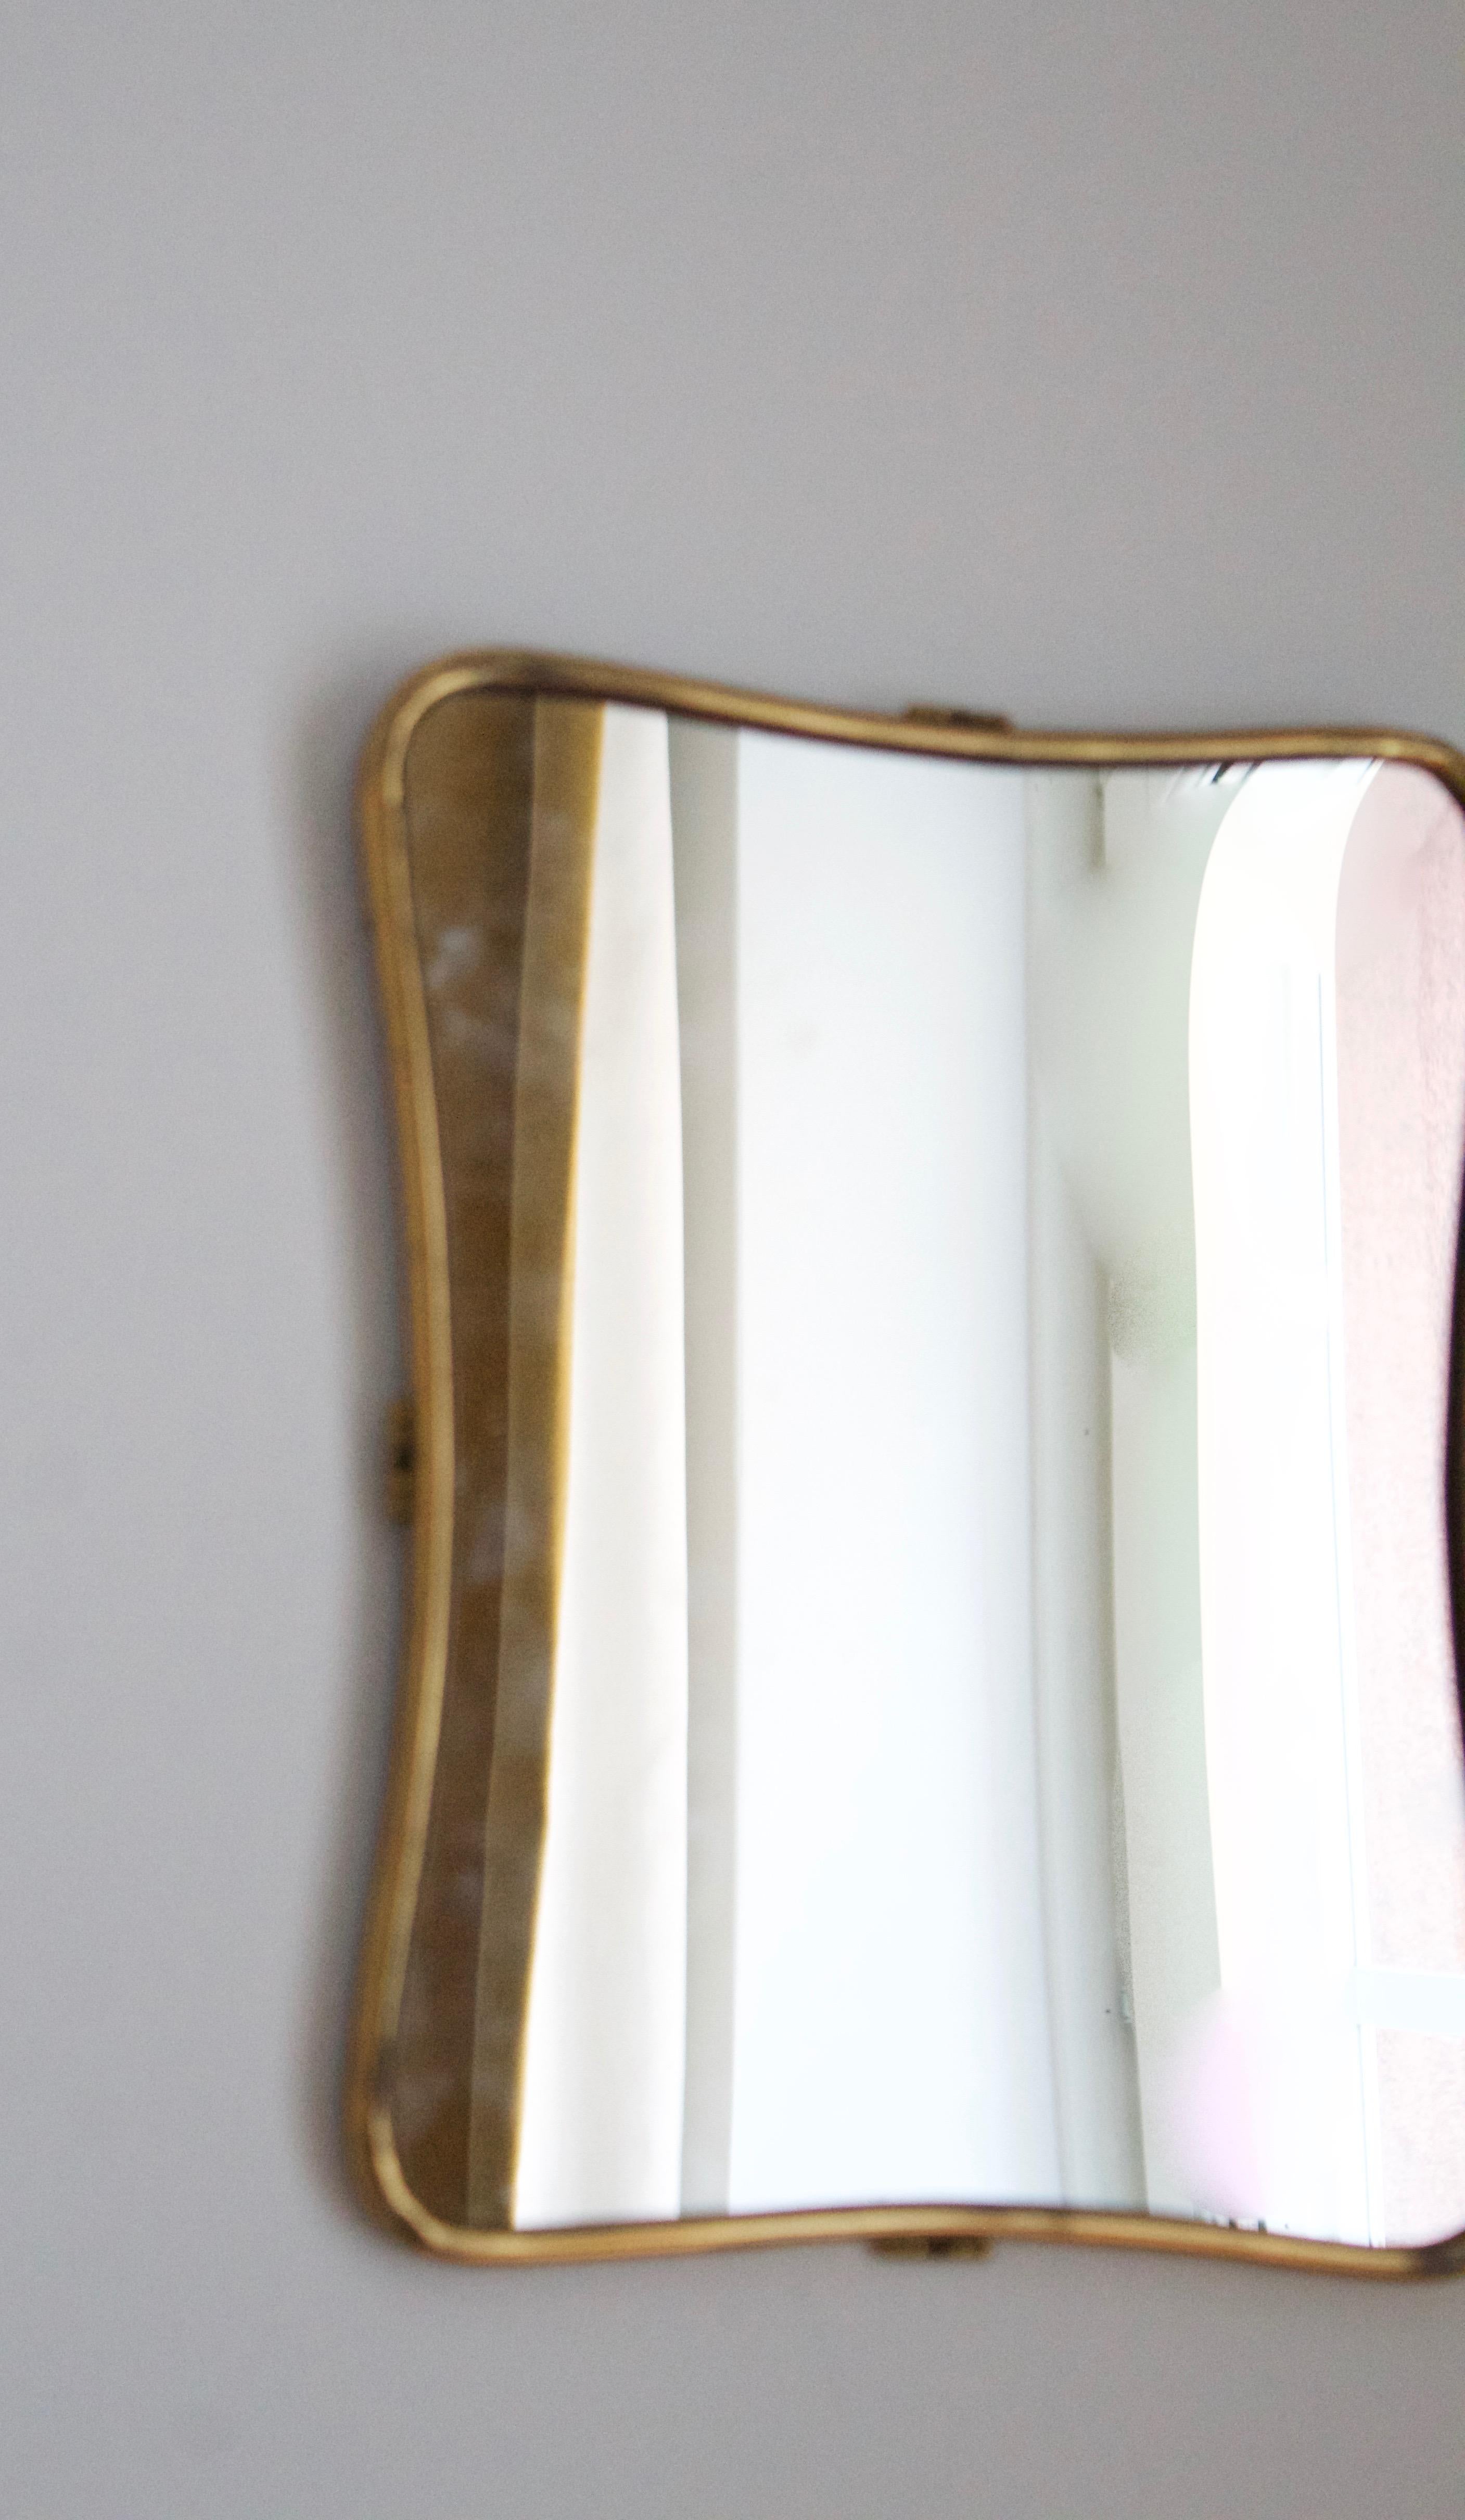 An organic wall mirror, produced in Italy, 1940s-1950s. Organically cut mirror glass is framed in brass.

Other designers of the period include Gio Ponti, Fontana Arte, Max Ingrand, Franco Albini, and Josef Frank.